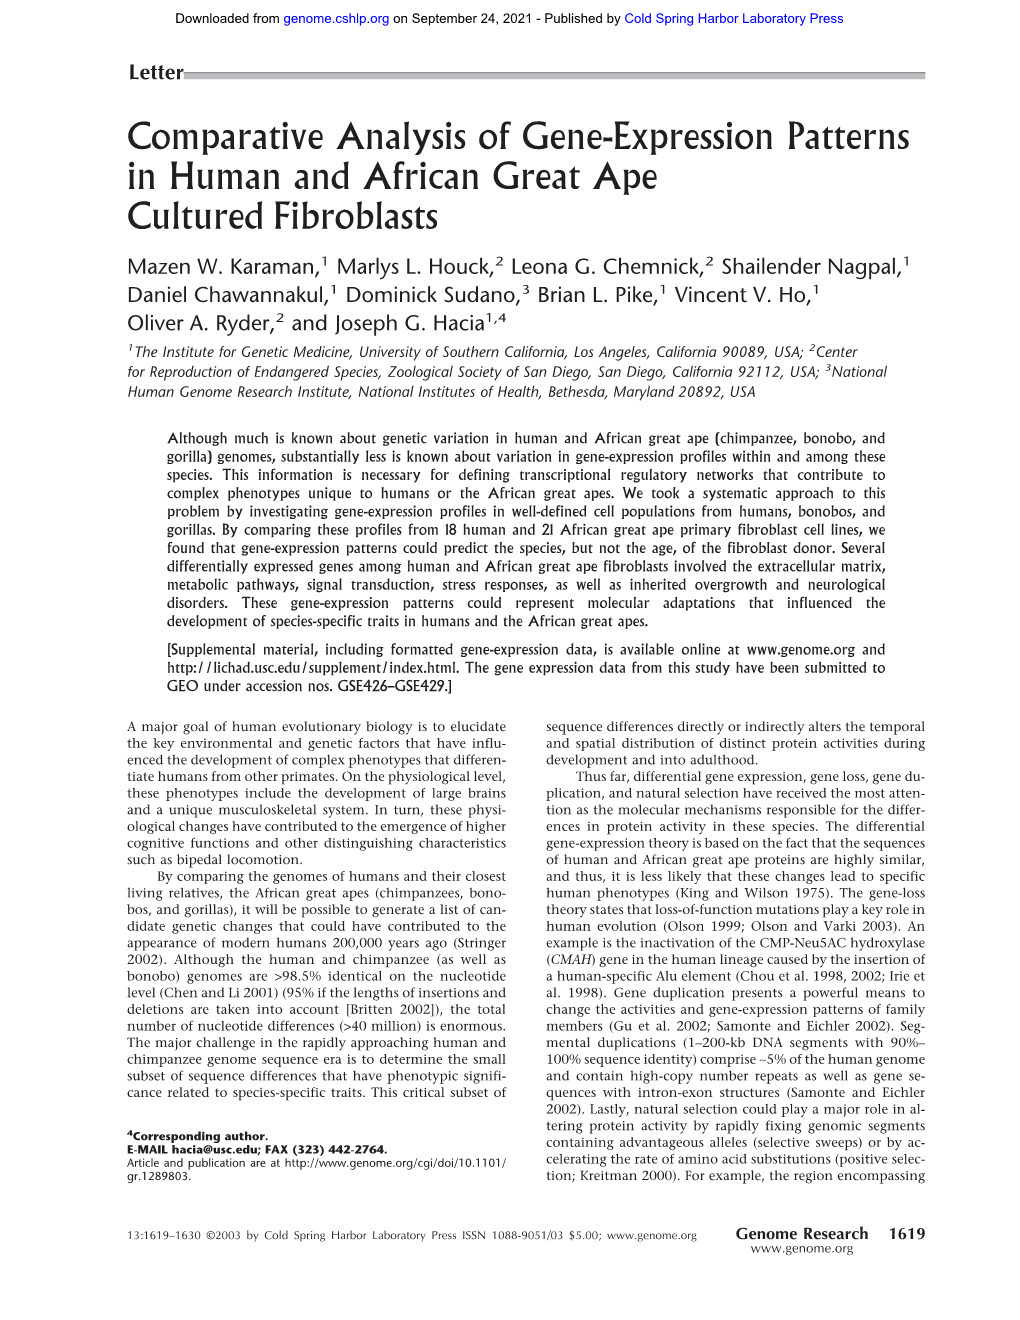 Comparative Analysis of Gene-Expression Patterns in Human and African Great Ape Cultured Fibroblasts Mazen W